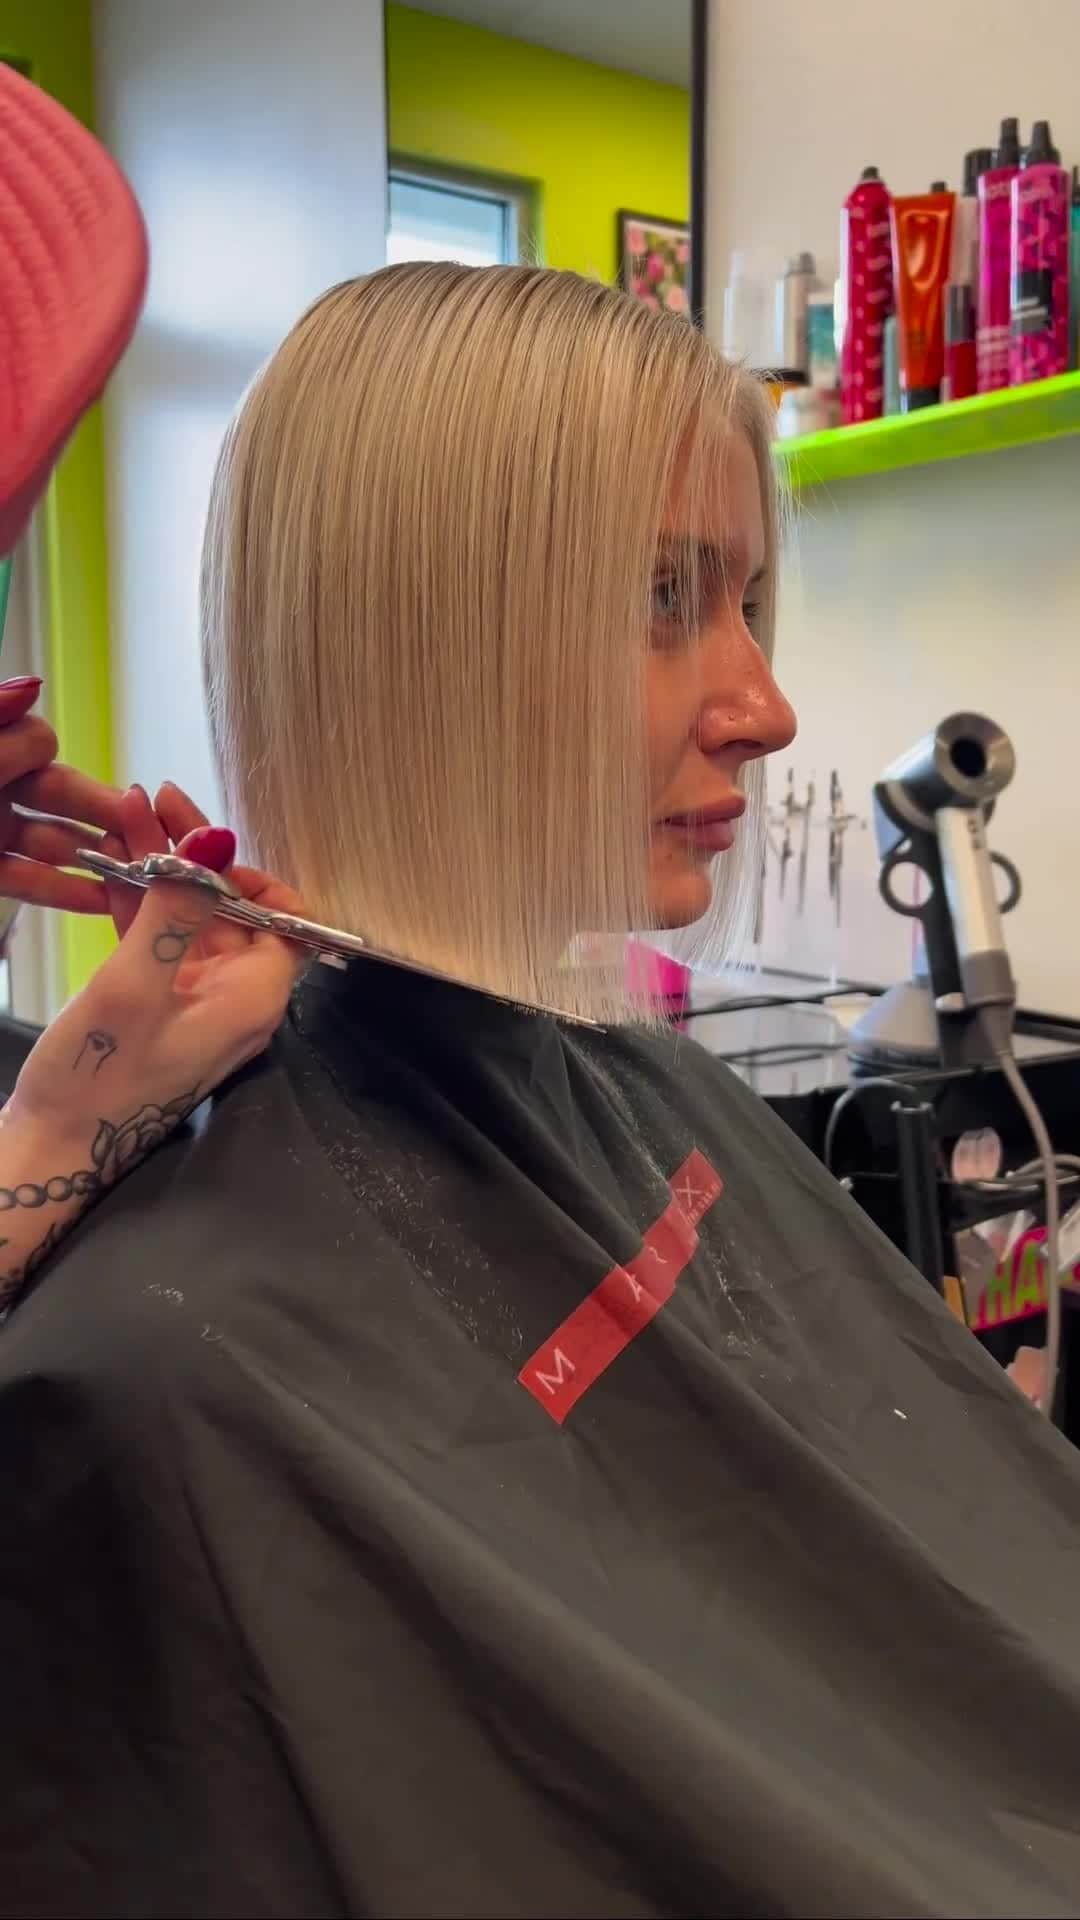 Sam Villaのインスタグラム：「⁠"a blunt cut 💫" - @tanarosehair⁠ ⁠ @tanarosehair reaches for her Sam Villa 7" Dry Cutting Shear for this precise and picture-perfect bob. ⁠ ⁠ About the Sam Villa Signature Series Dry Cutting Shear // ⁠ ⁠ Imagine dry cutting with ease and precision. No tiny sections, no pull, no drag, no elbow or shoulder pain. This shear will transform the way you work. Powerful sword blades cut effortlessly through large sections of hair, making it the ideal tool for dry cutting and condensed cutting techniques. Meanwhile, the ergonomic handle protects you from injury by keeping your elbow in a safe downward position.⁠ ⁠ #SamVilla⁠ #SamVillaCommunity⁠ .⁠ .⁠ .⁠ .⁠ .⁠ .⁠ .⁠ #haircutting #samvilla #hairtutorial #hairvideo #haircut #hairstylist #behindthechair #modernsalon #americansalon⁠」